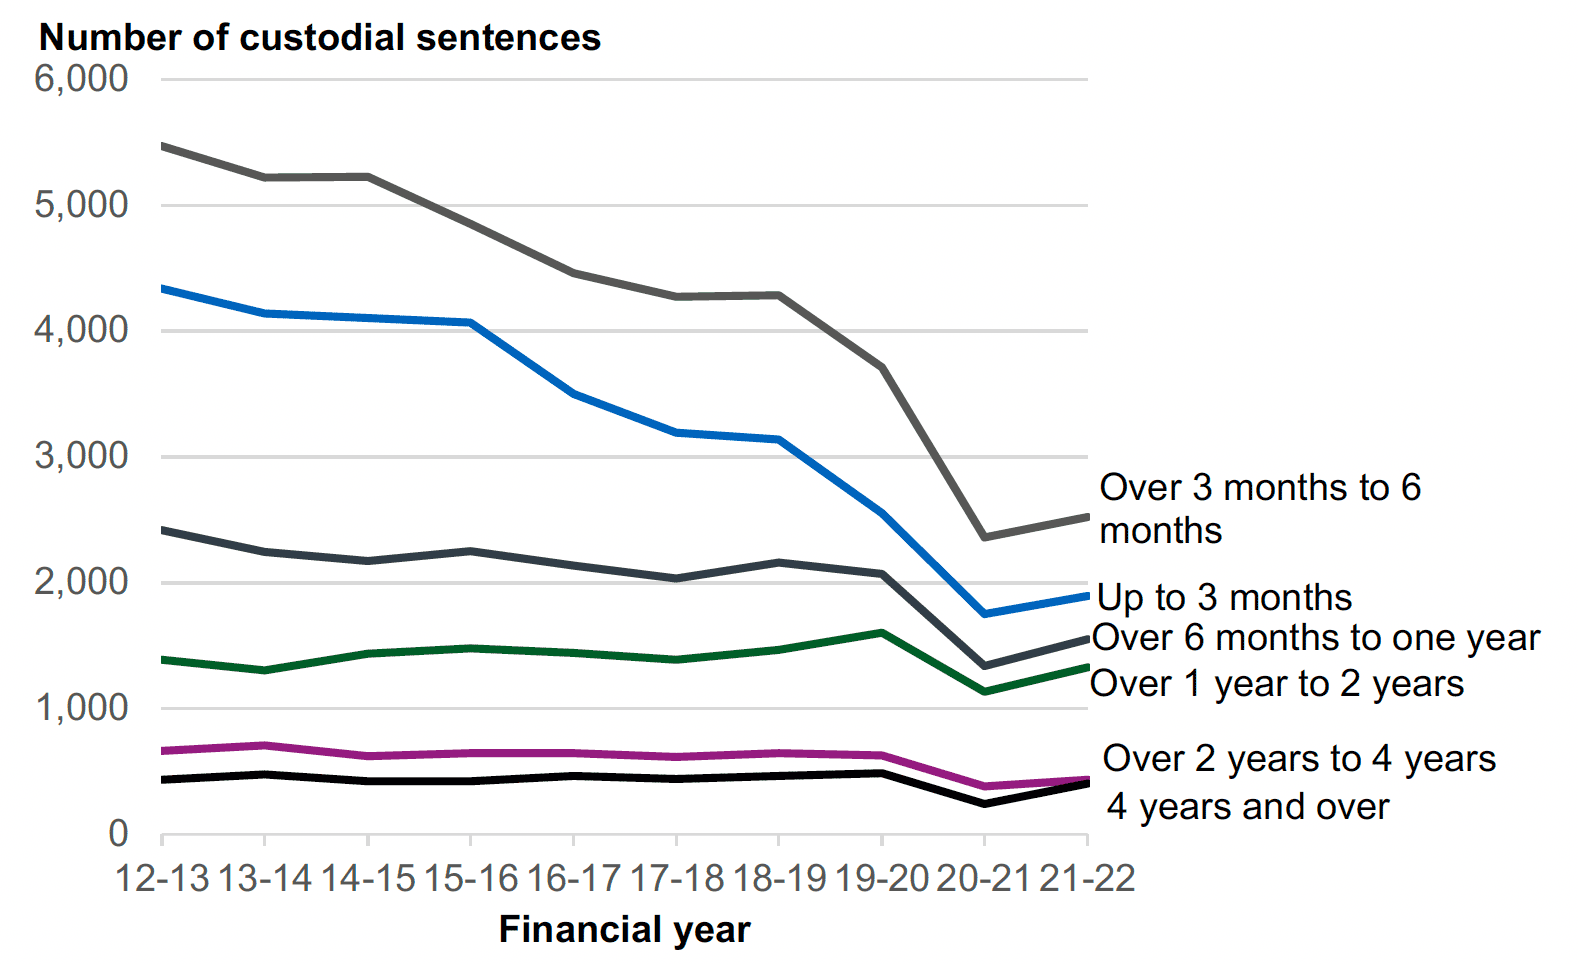 A line chart showing the number of custodial sentences, split into six categories by sentence length, between 2011-12 and 2020-21. Each category shows a long term decrease prior to 2021-22, with 2021-22 showing a slight increase from 2020-21. Shorter sentences are shown to make up most custodial sentences, and these also have the larger decreases over the last 10 years. Sentences to three months have more than halved in 10 years from over 4,000, as have those between three and six months from over 5,000.